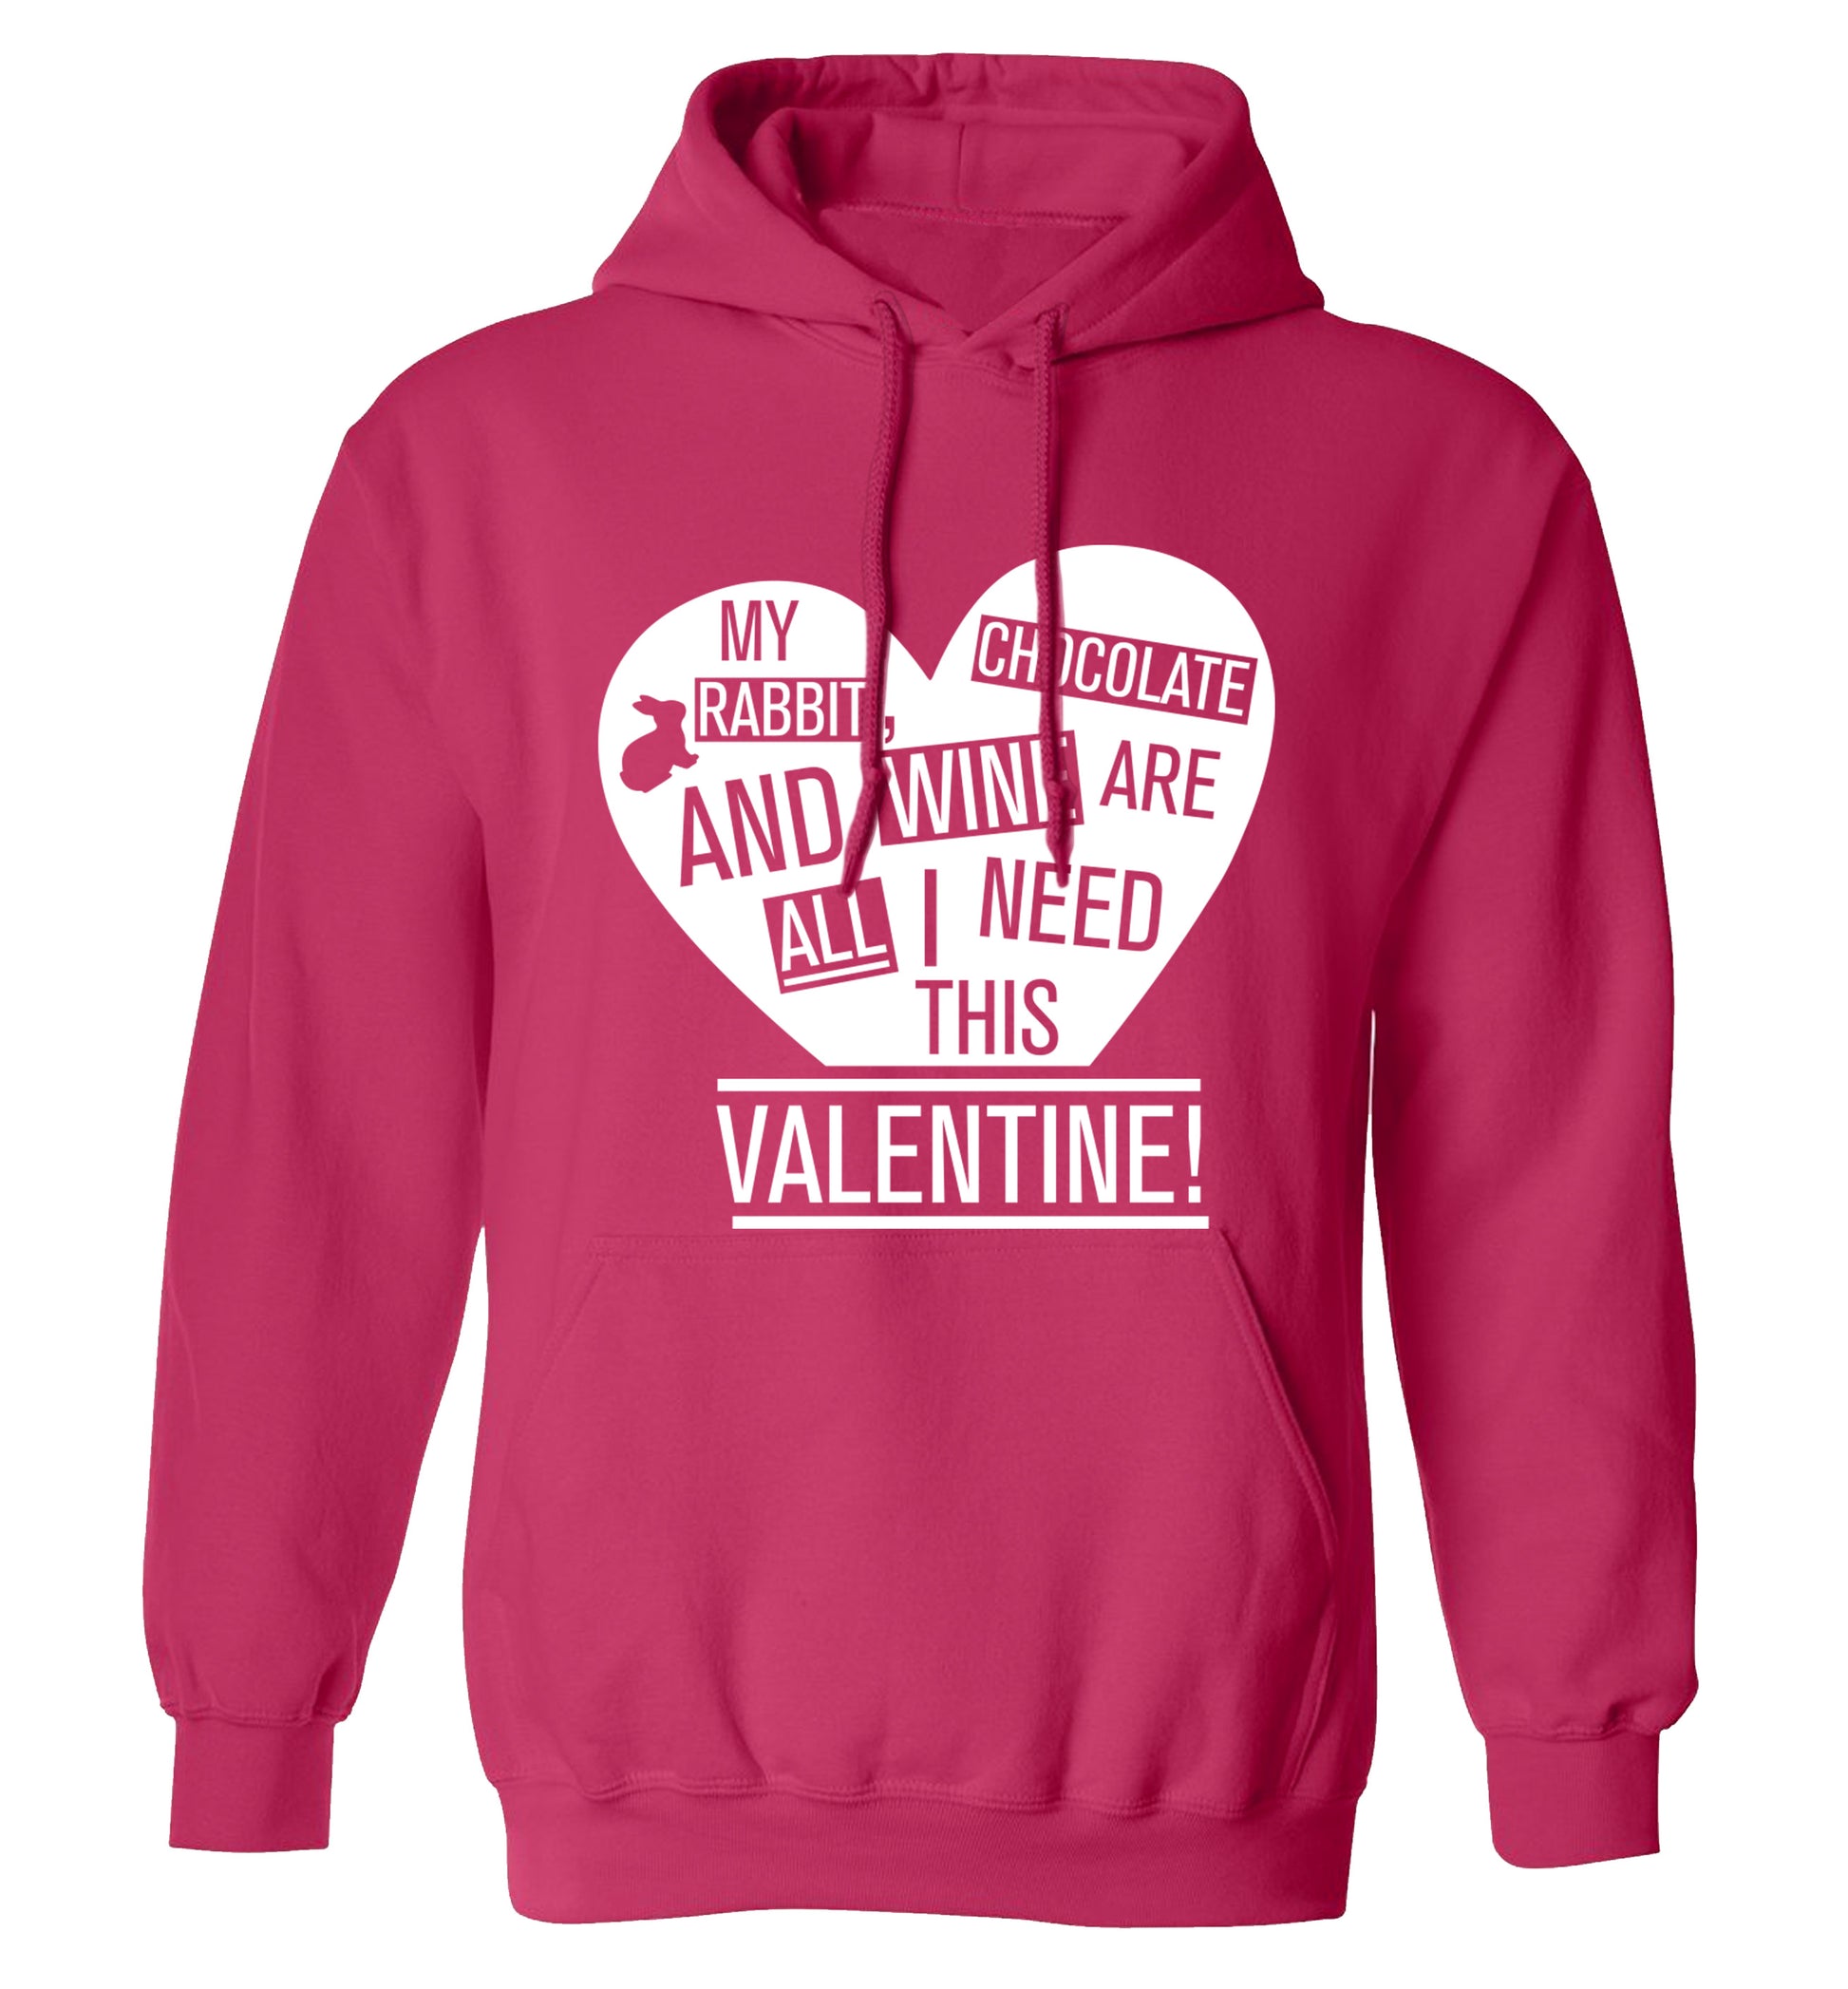 My rabbit, chocolate and wine are all I need this valentine! adults unisex pink hoodie 2XL